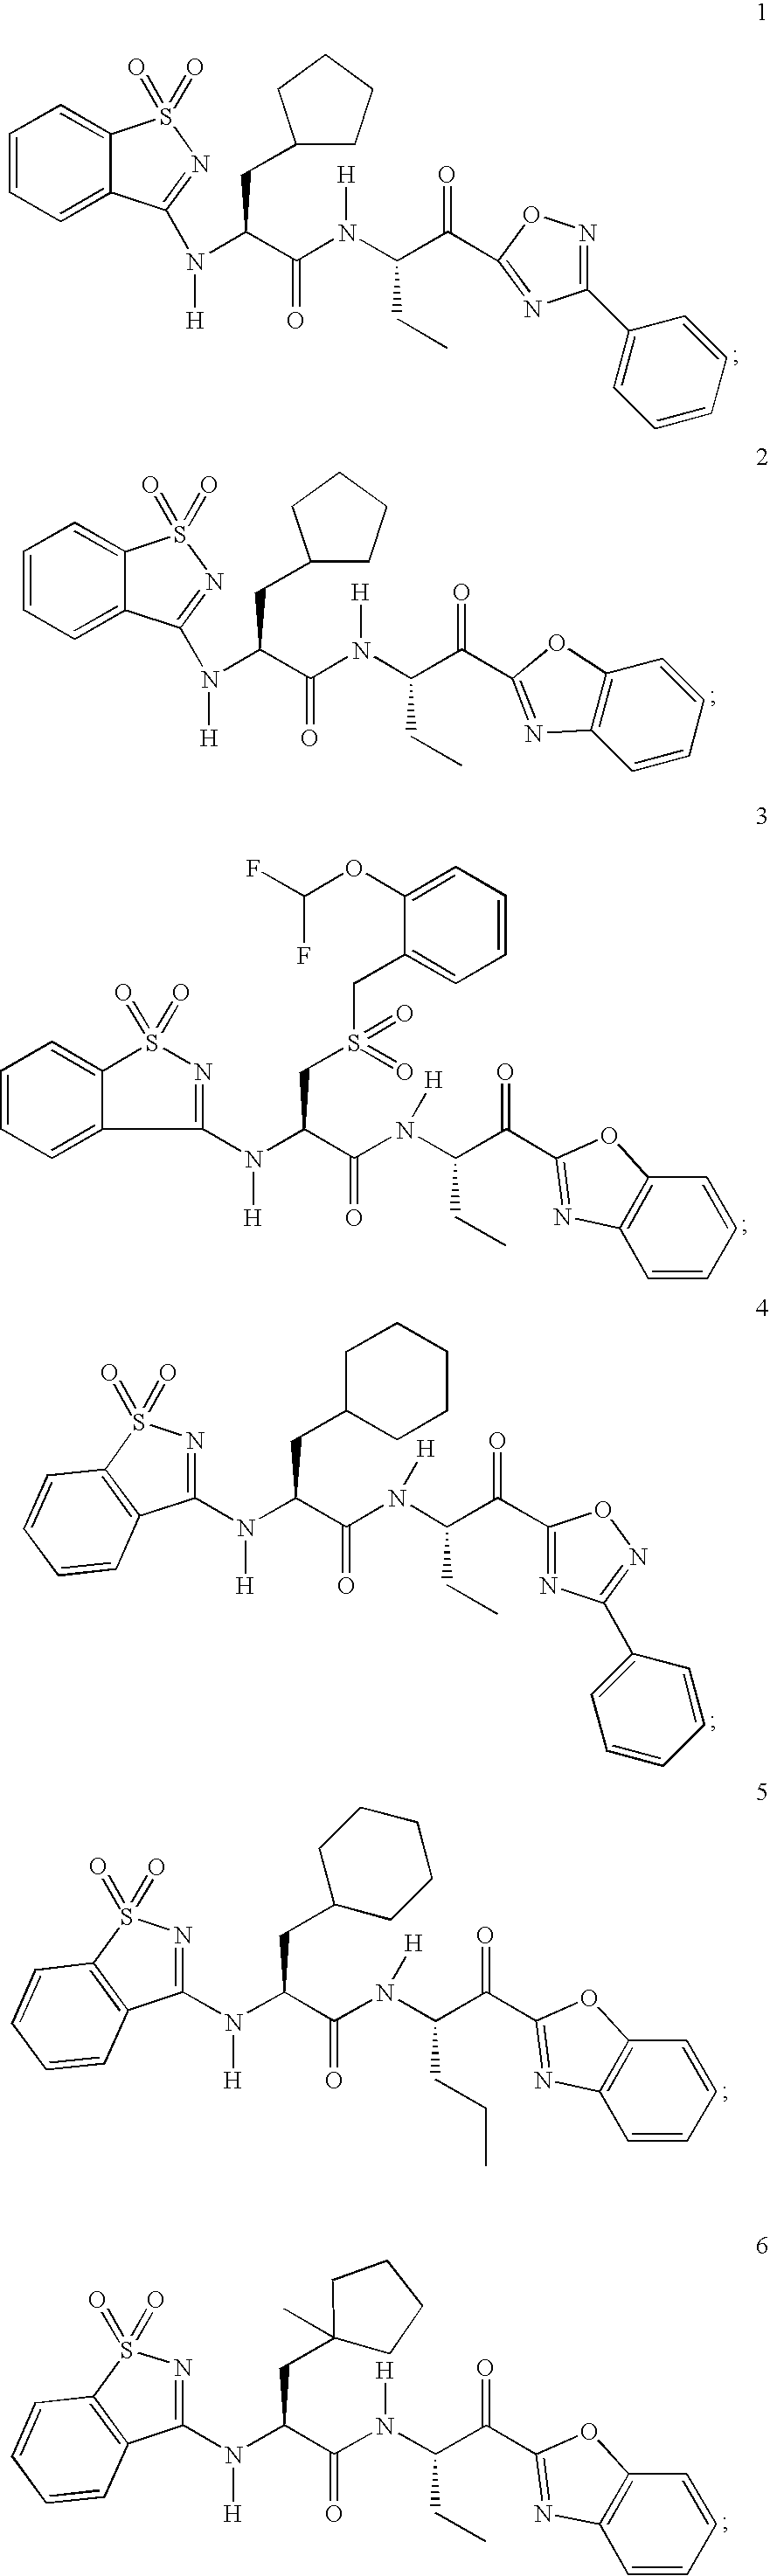 Amidino compounds as cysteine protease inhibitors